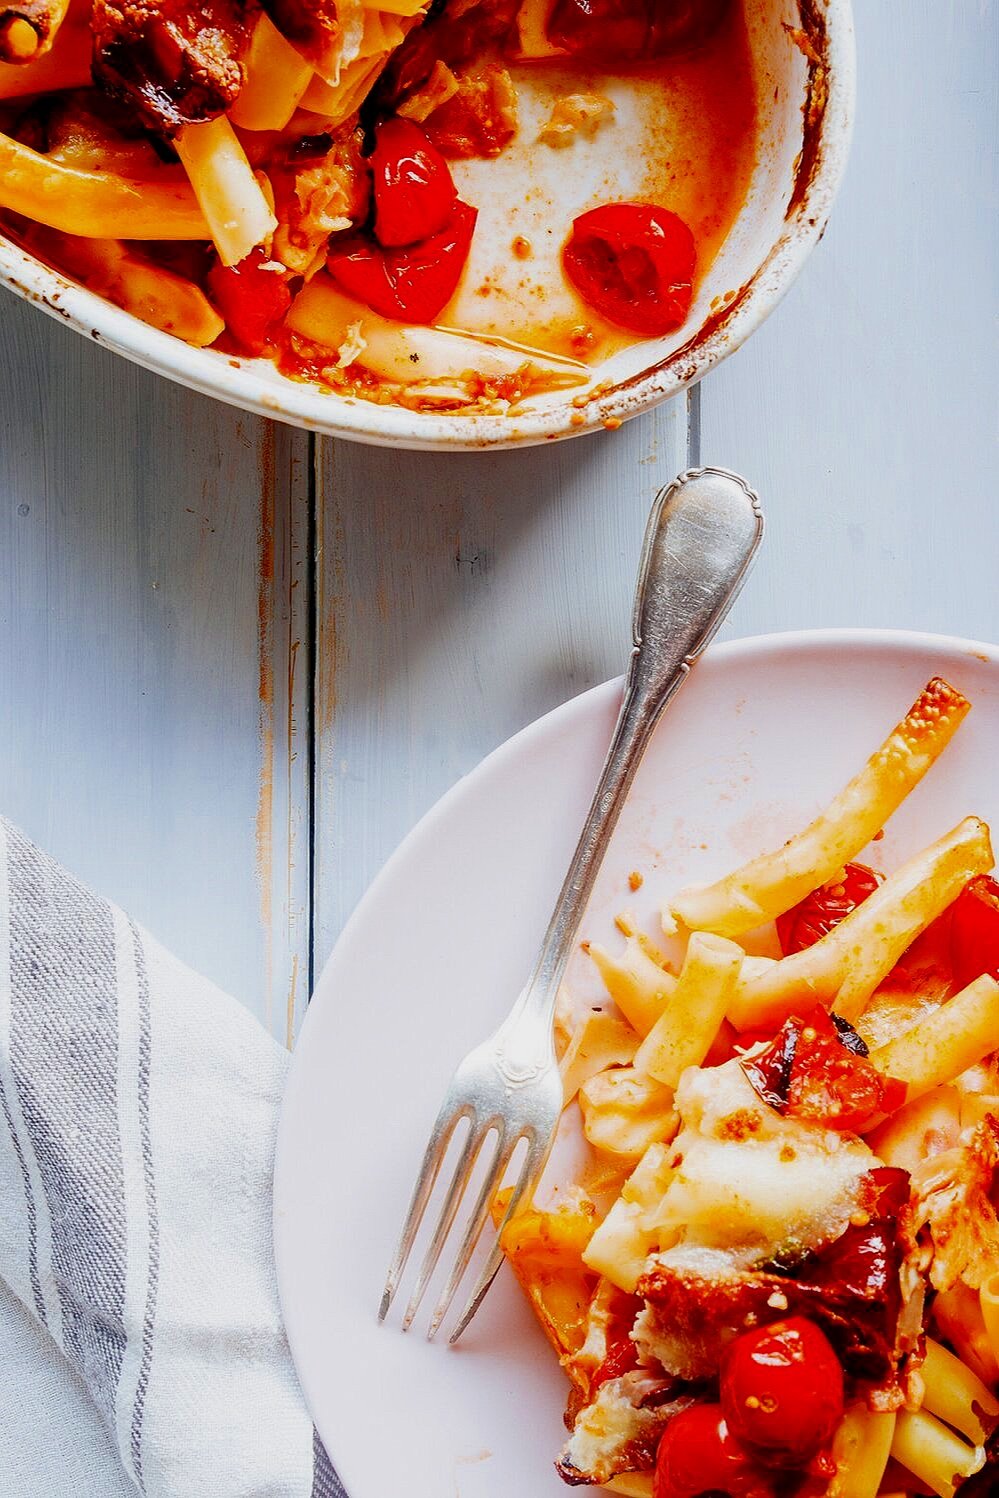 Baked Rigatoni with Tomato Béchamel Sauce